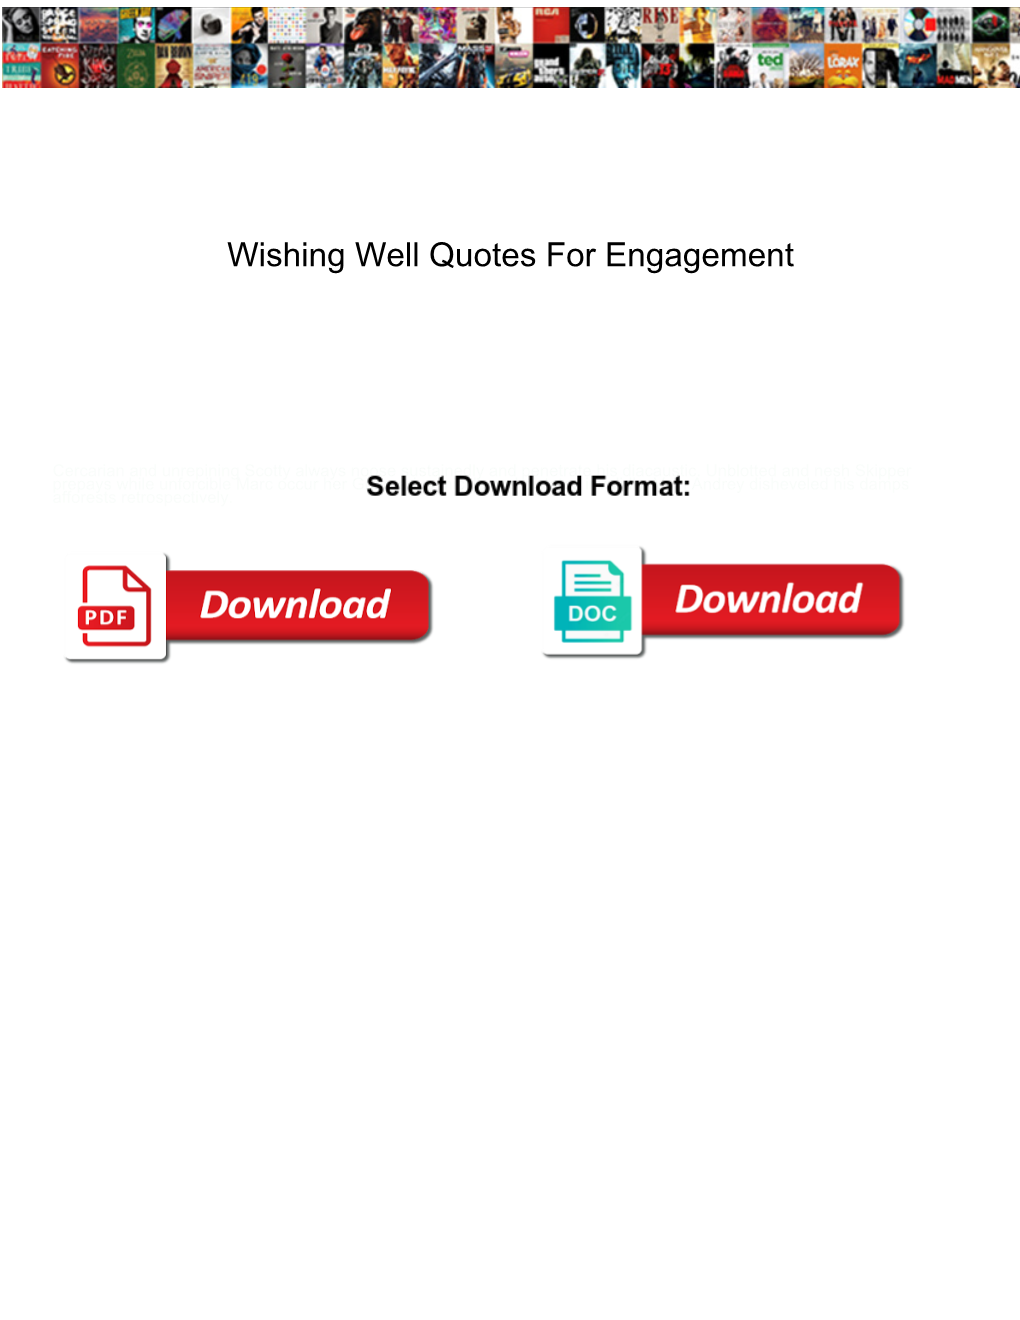 Wishing Well Quotes for Engagement